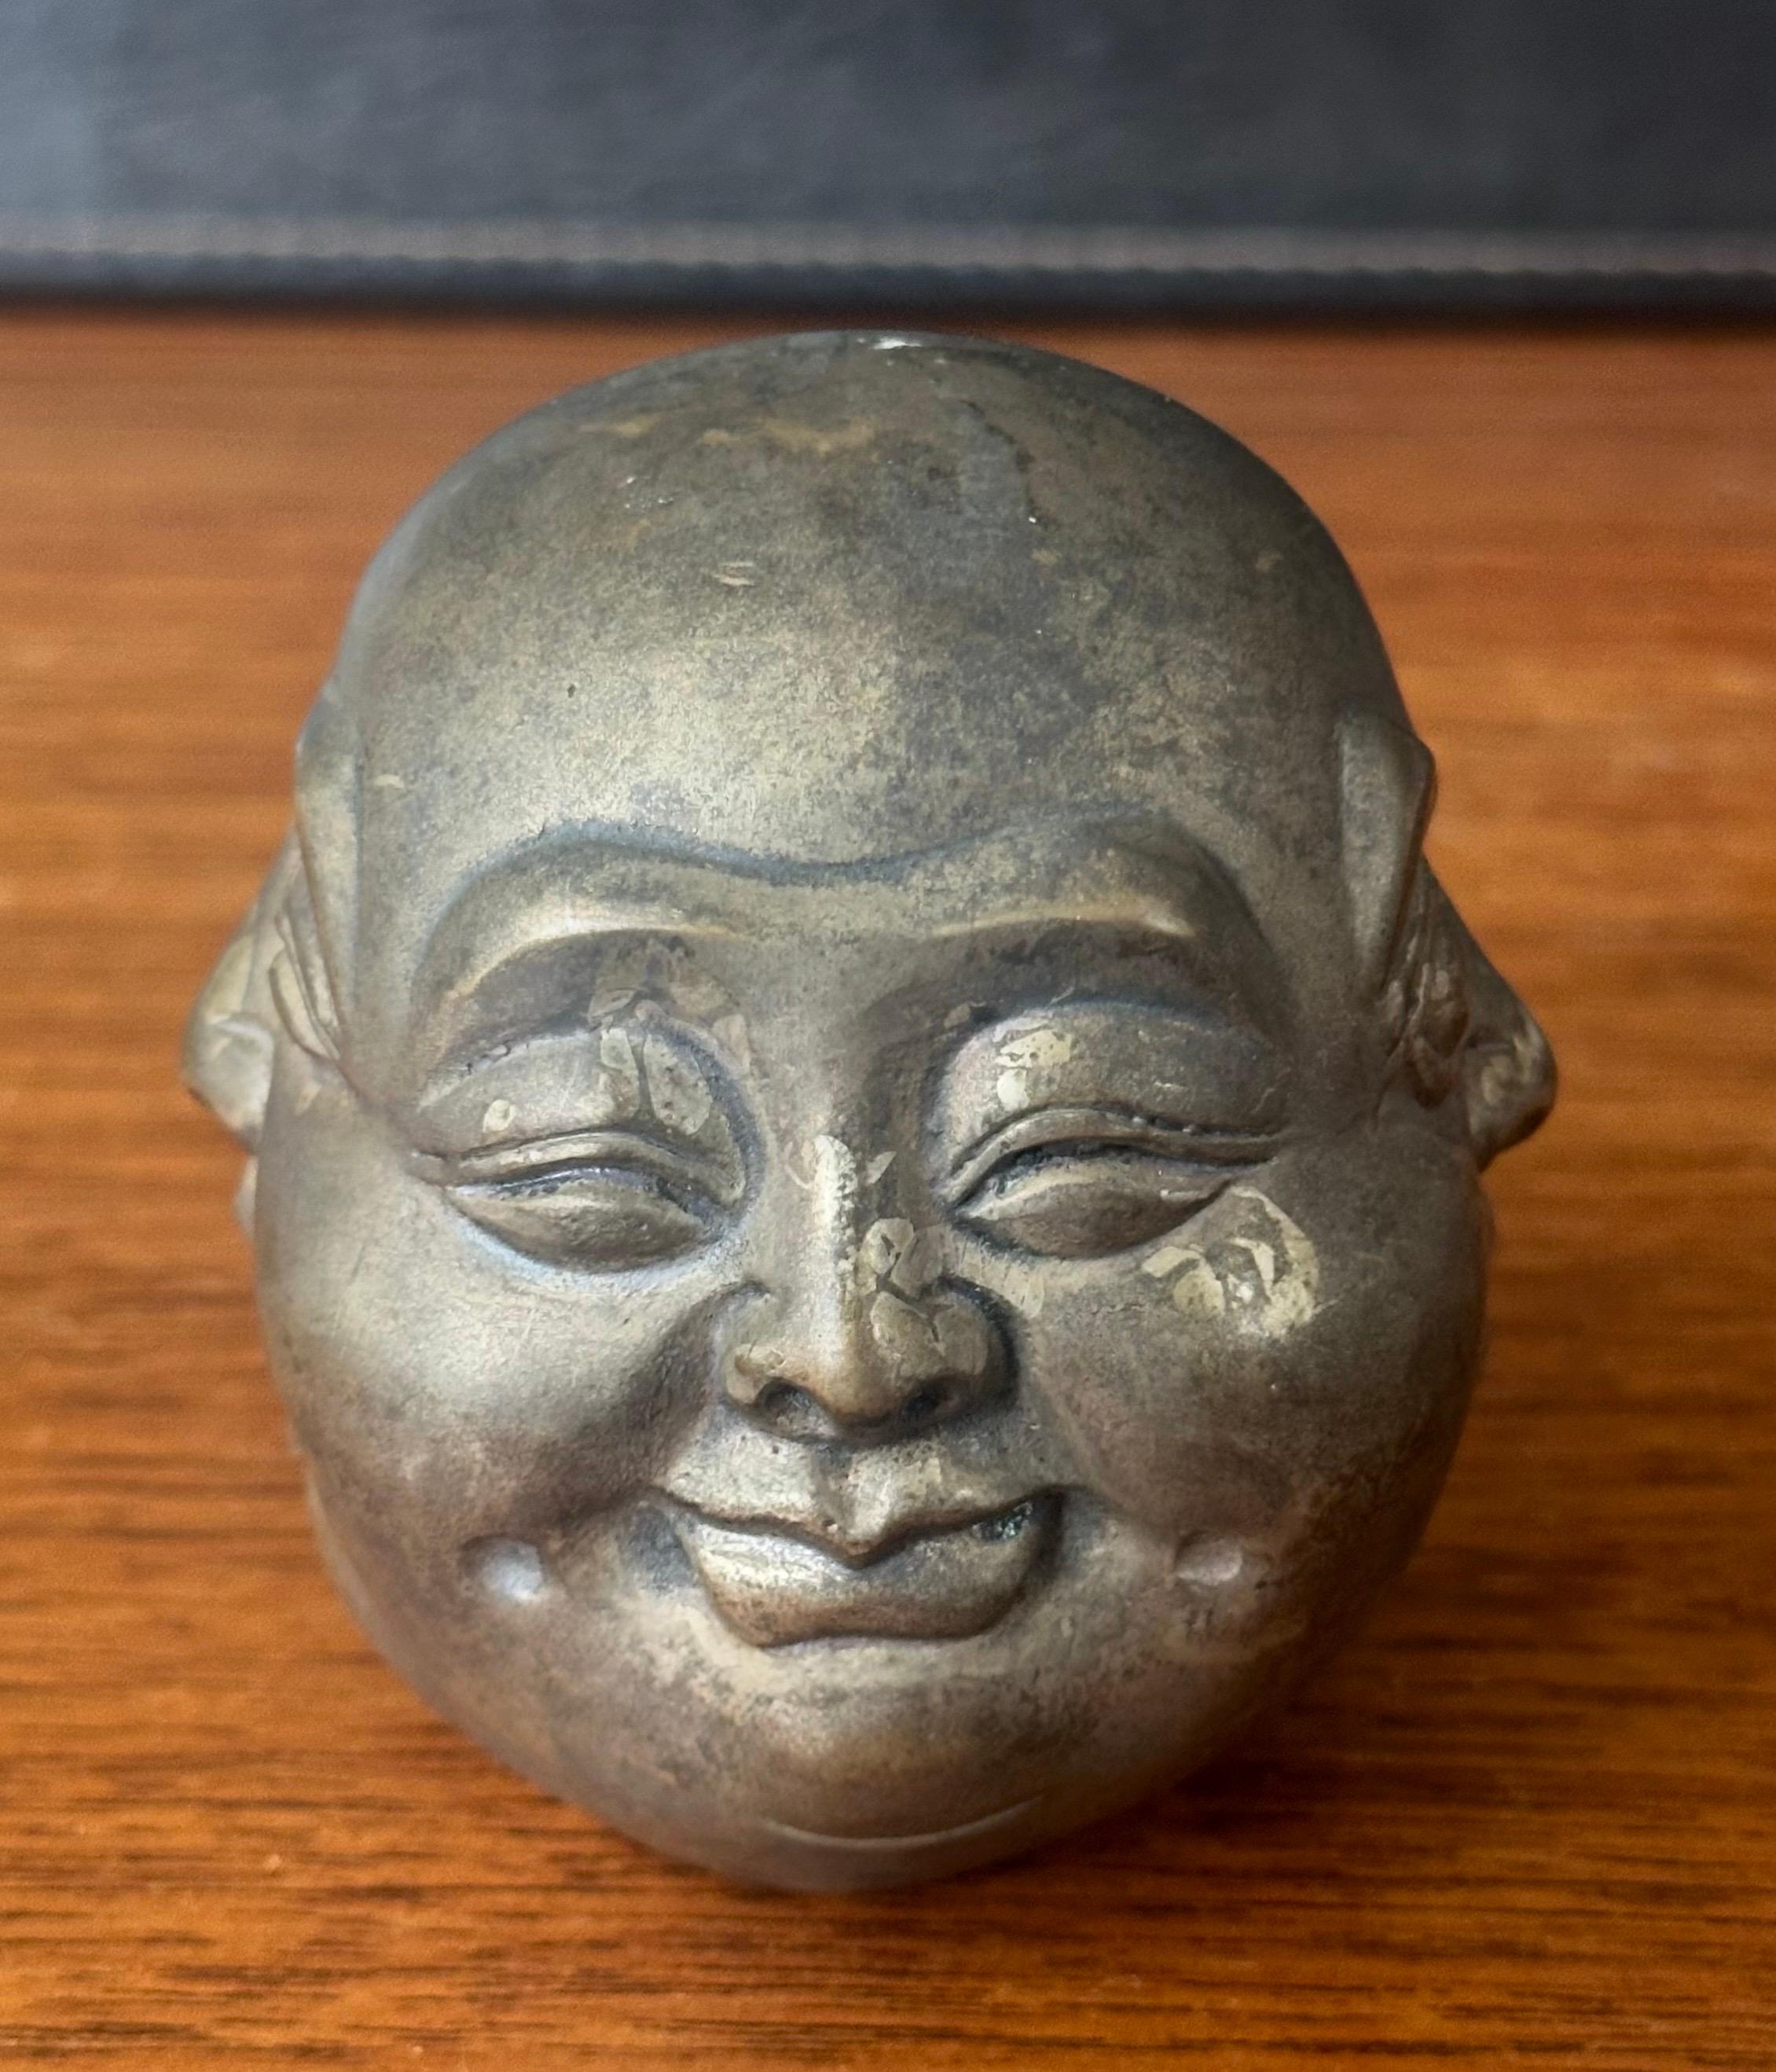 A very cool four faced bronze Buddha head sculpture or paperweight, circa 1960s. The piece is in very good vintage condition and measures: 3